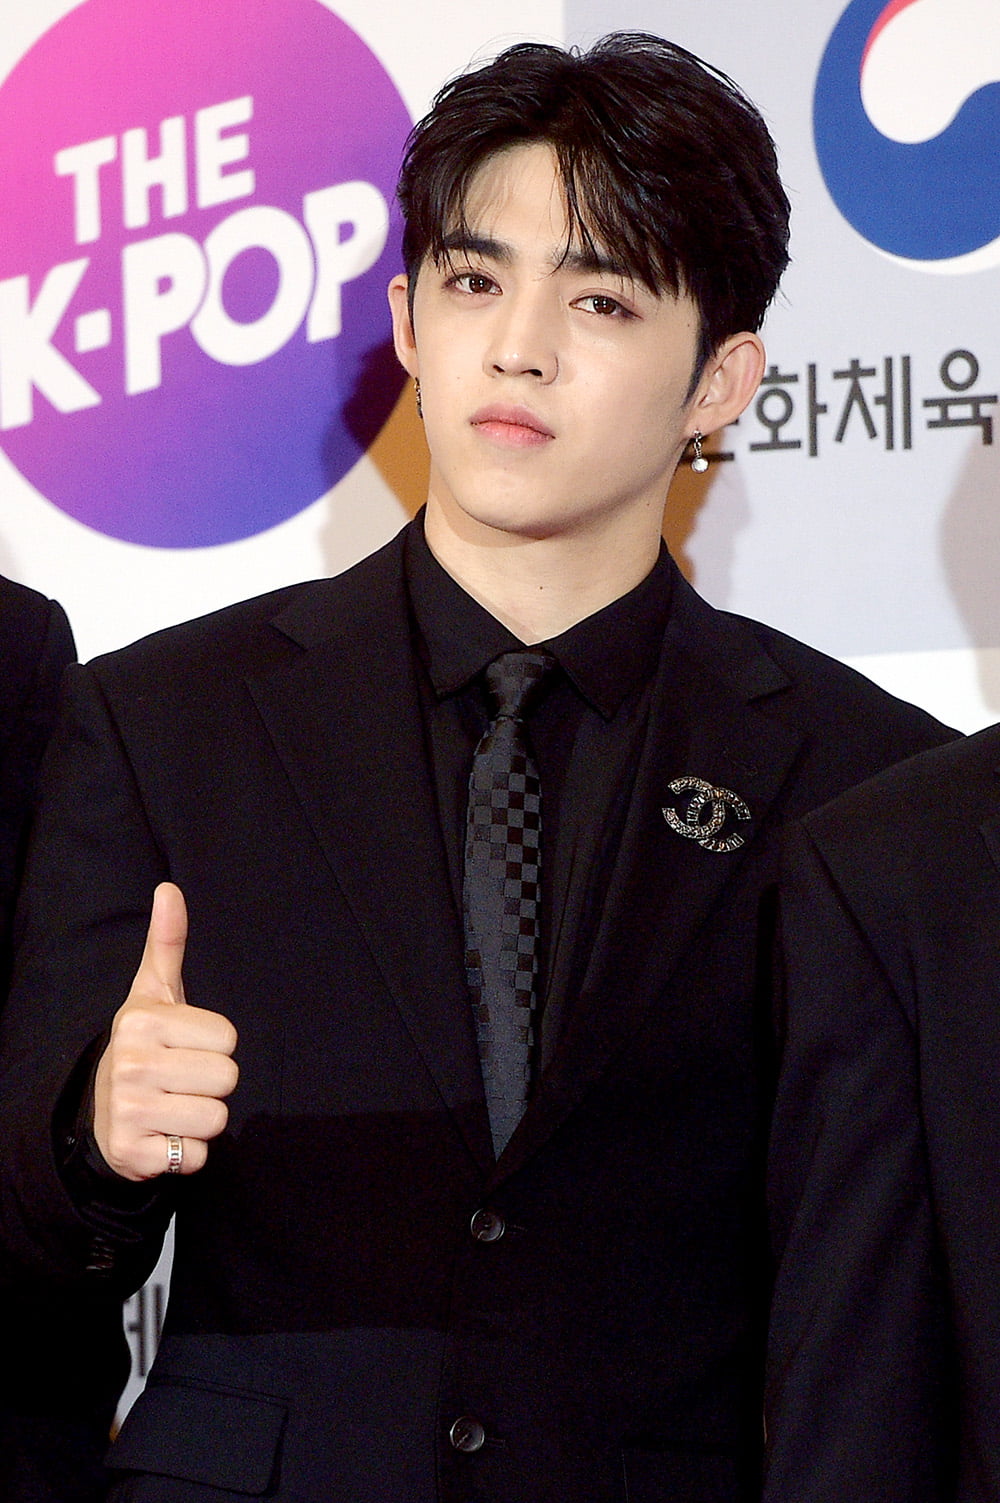 Pledis side "S.Coups, cruciate ligament surgery was successful"... Digestion of the schedule is unclear